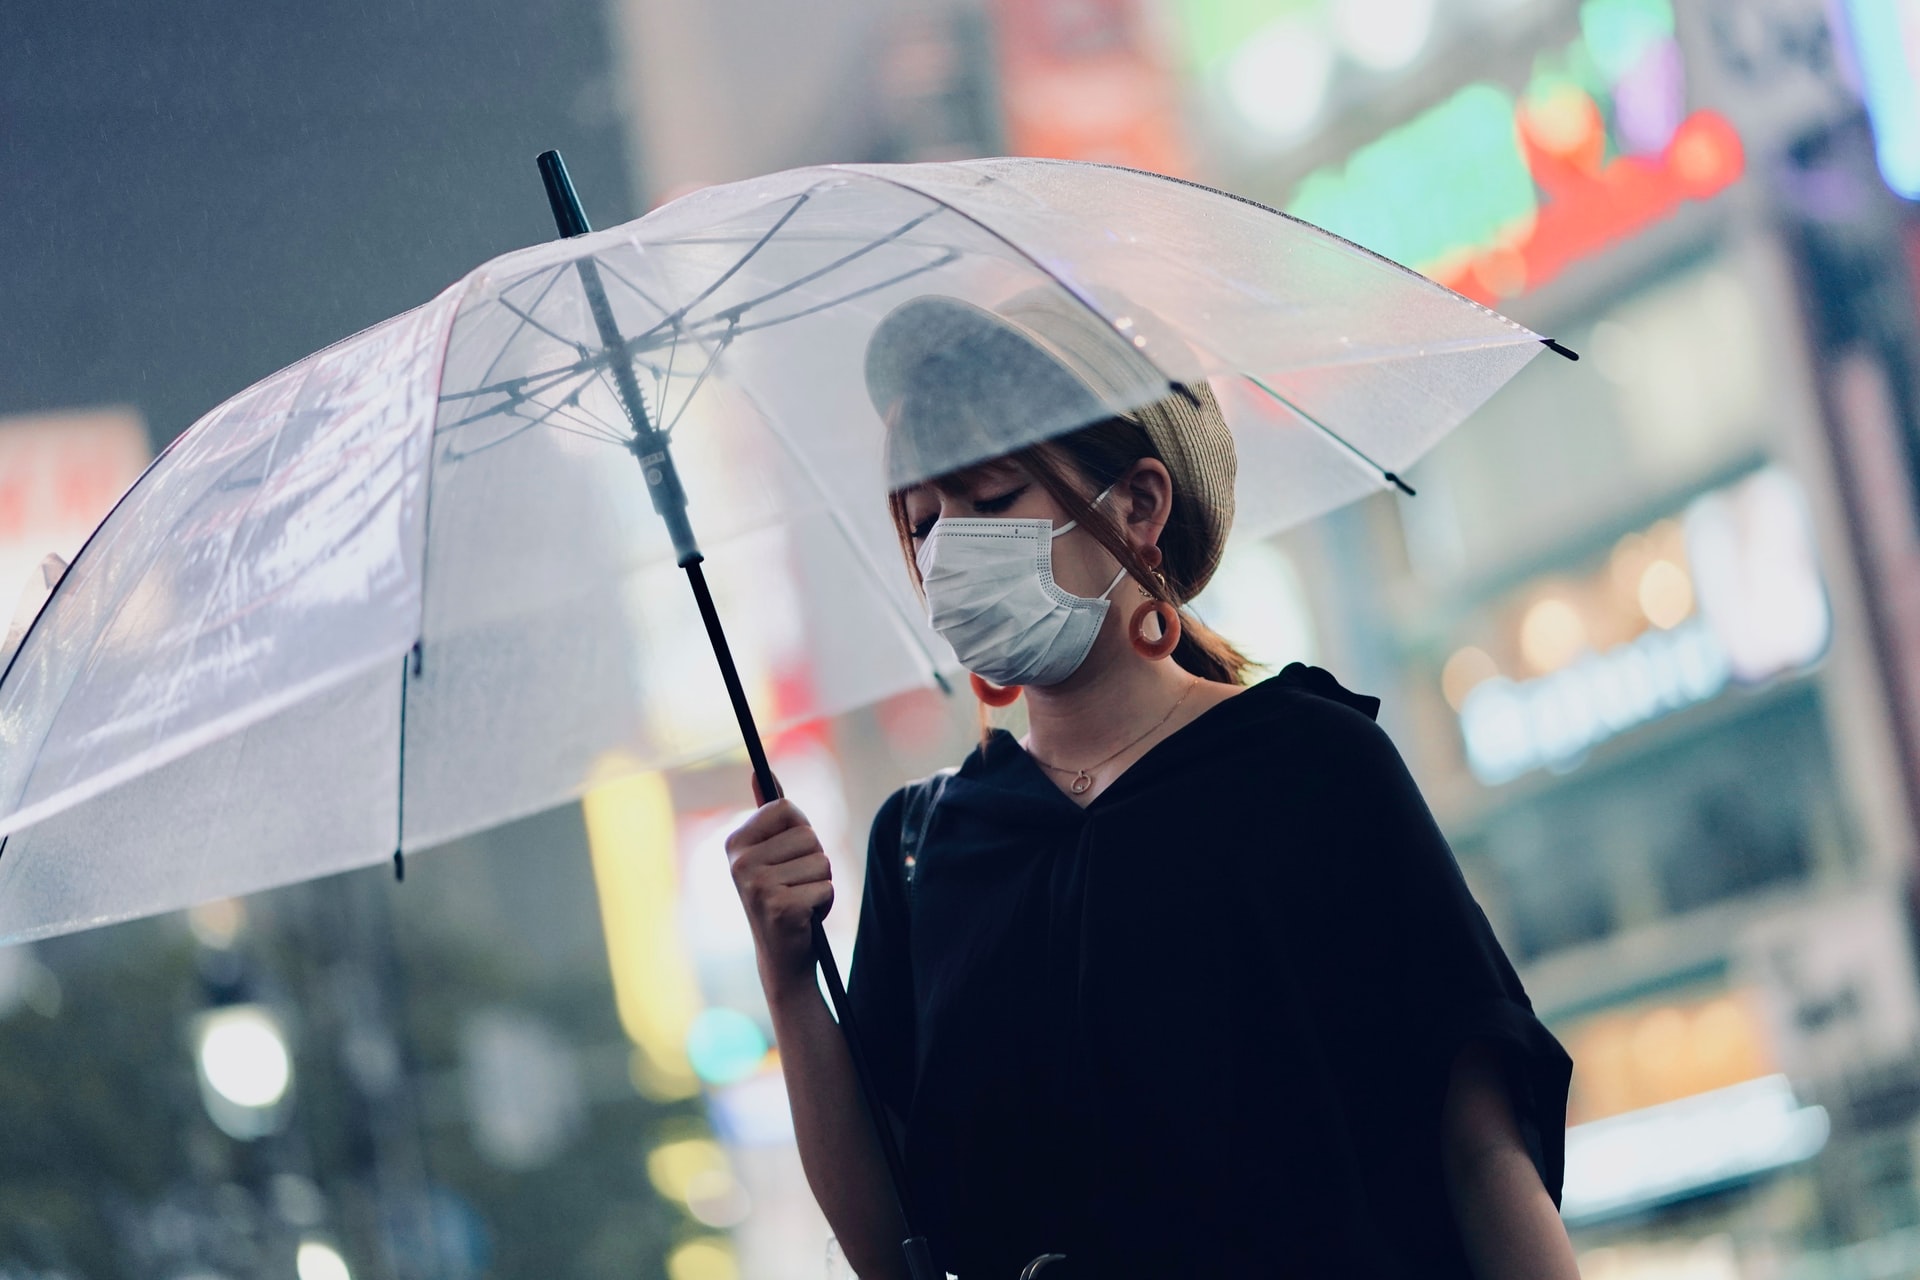 Header image depicts a woman holding a transparent umbrella in Tokyo, Japan. (Stock photo courtesy of Tore F/Unsplash)